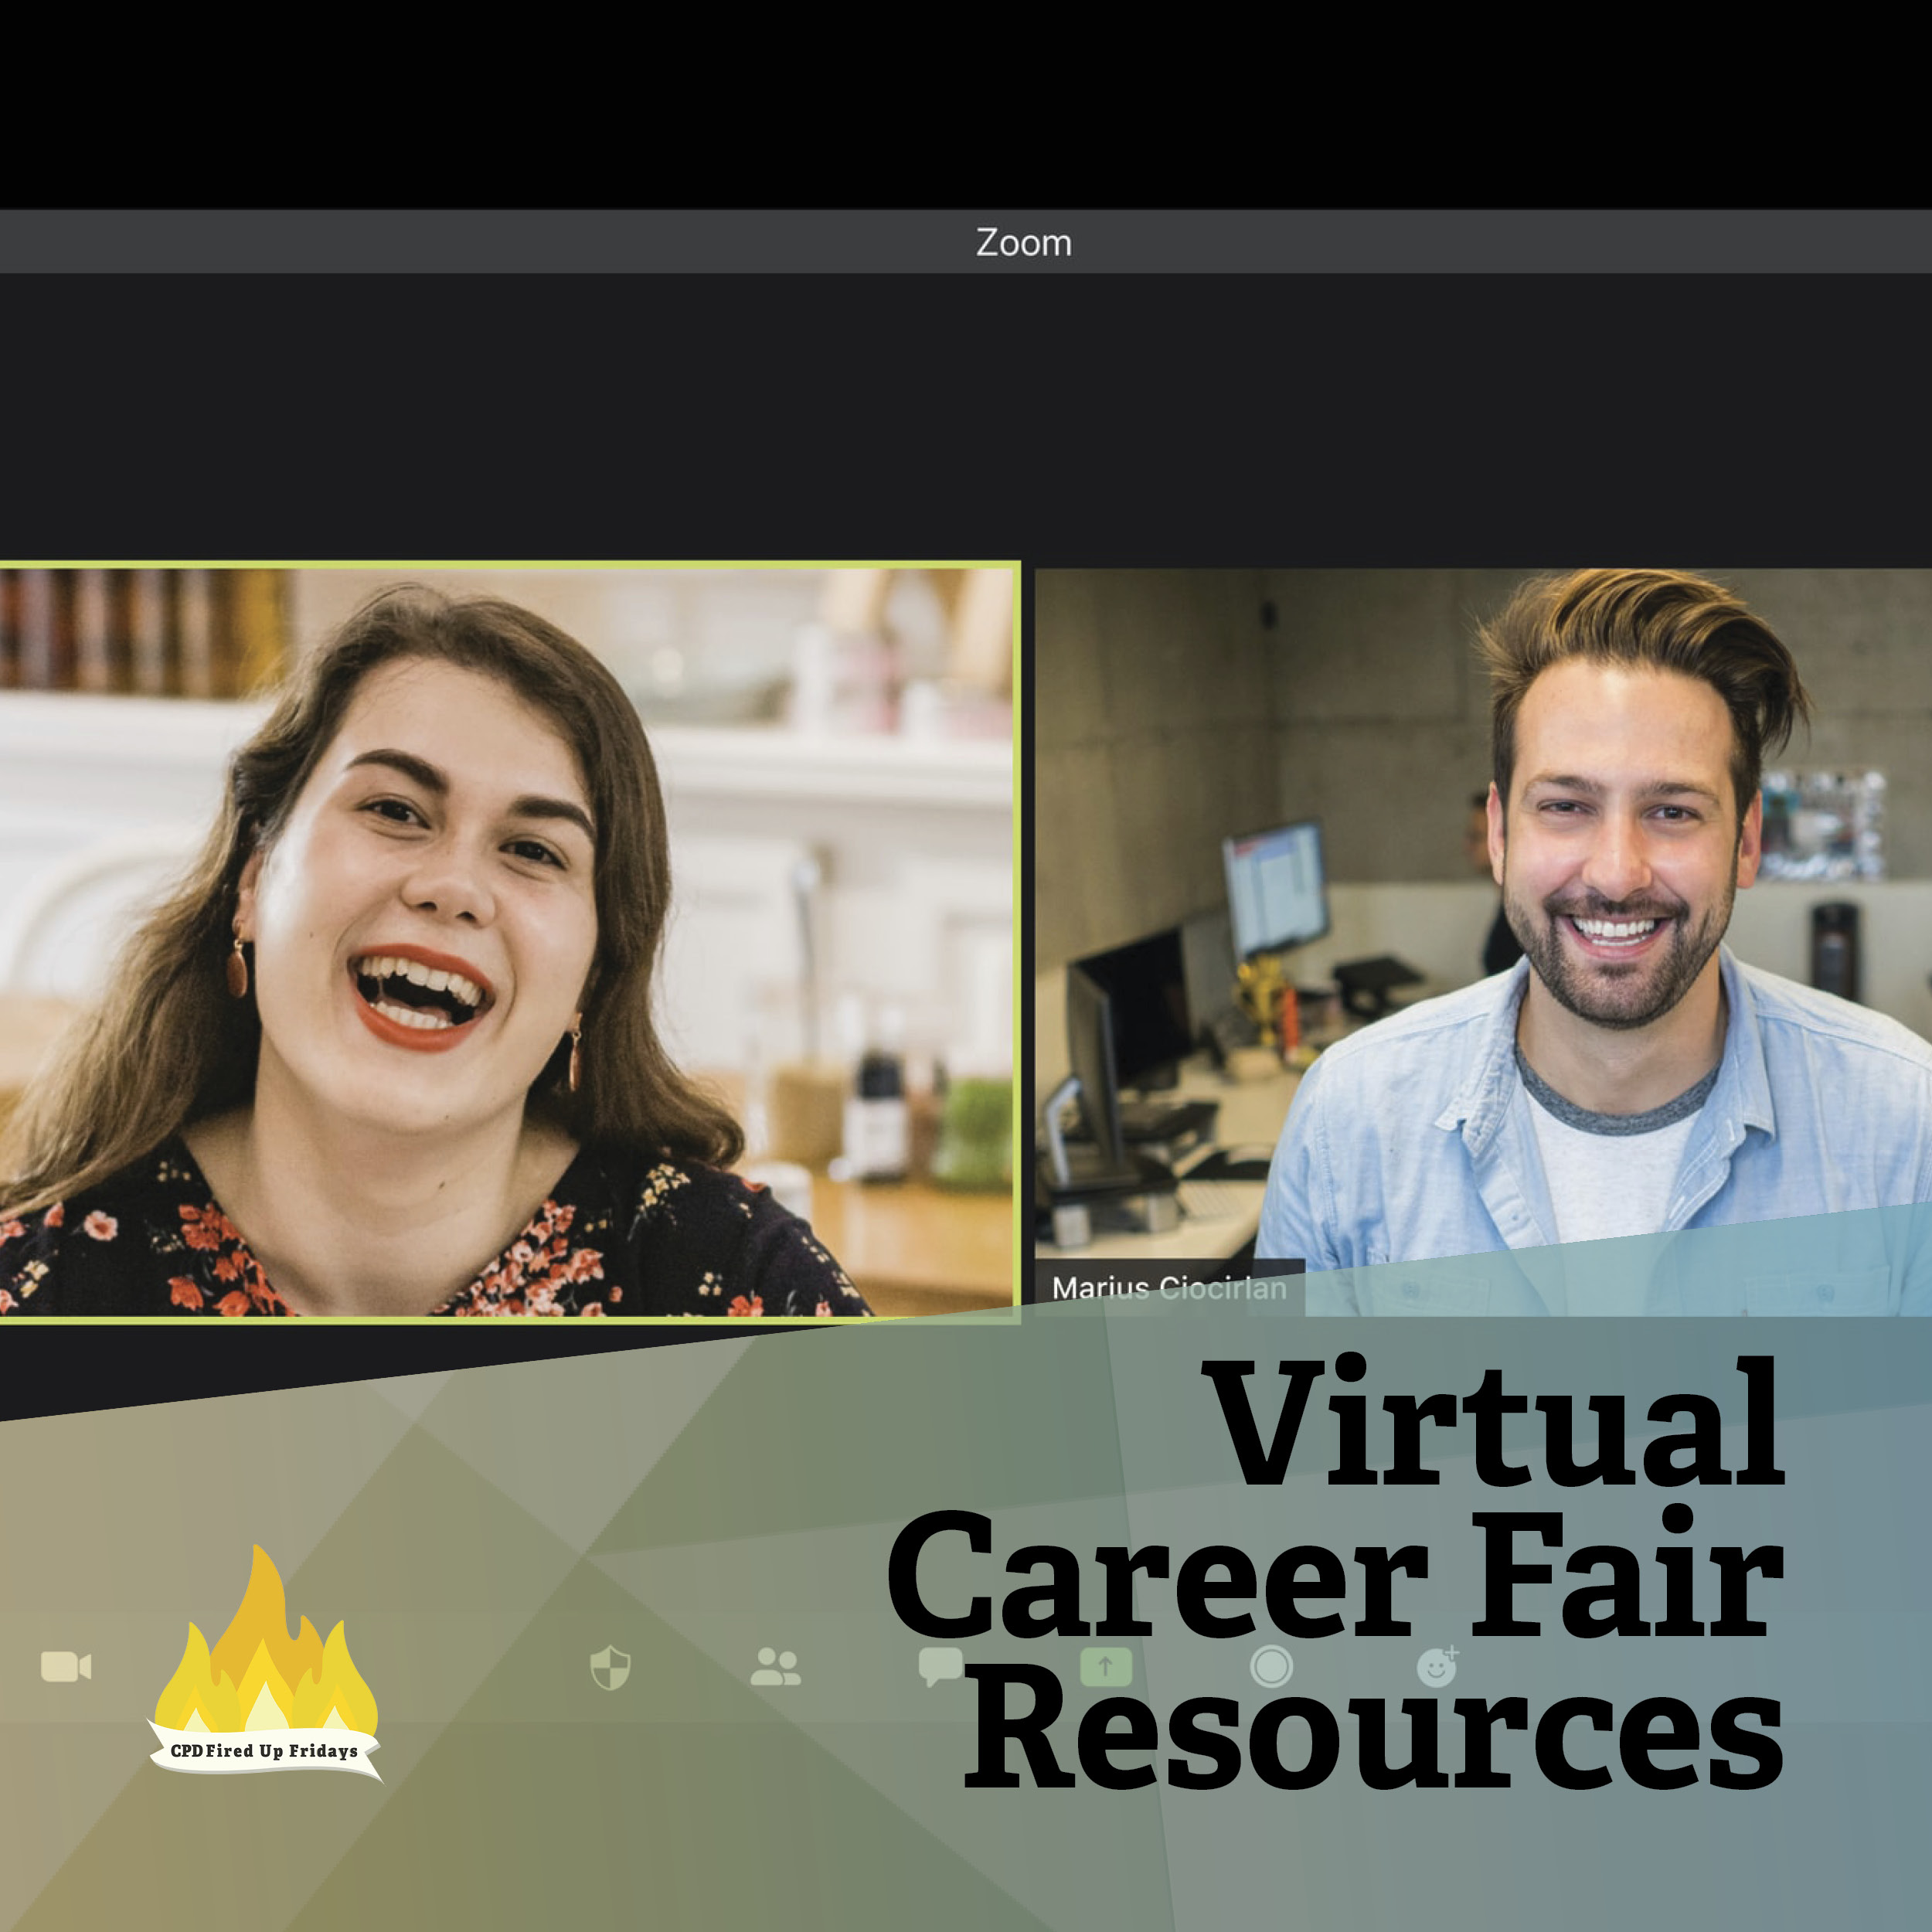 A screen capture of two people in a Zoom meeting. There is a man on the left and a woman on the right, and she appears to be laughing as he smiled. Beneath the text reads: 'Virtual Career Fair Resources.'